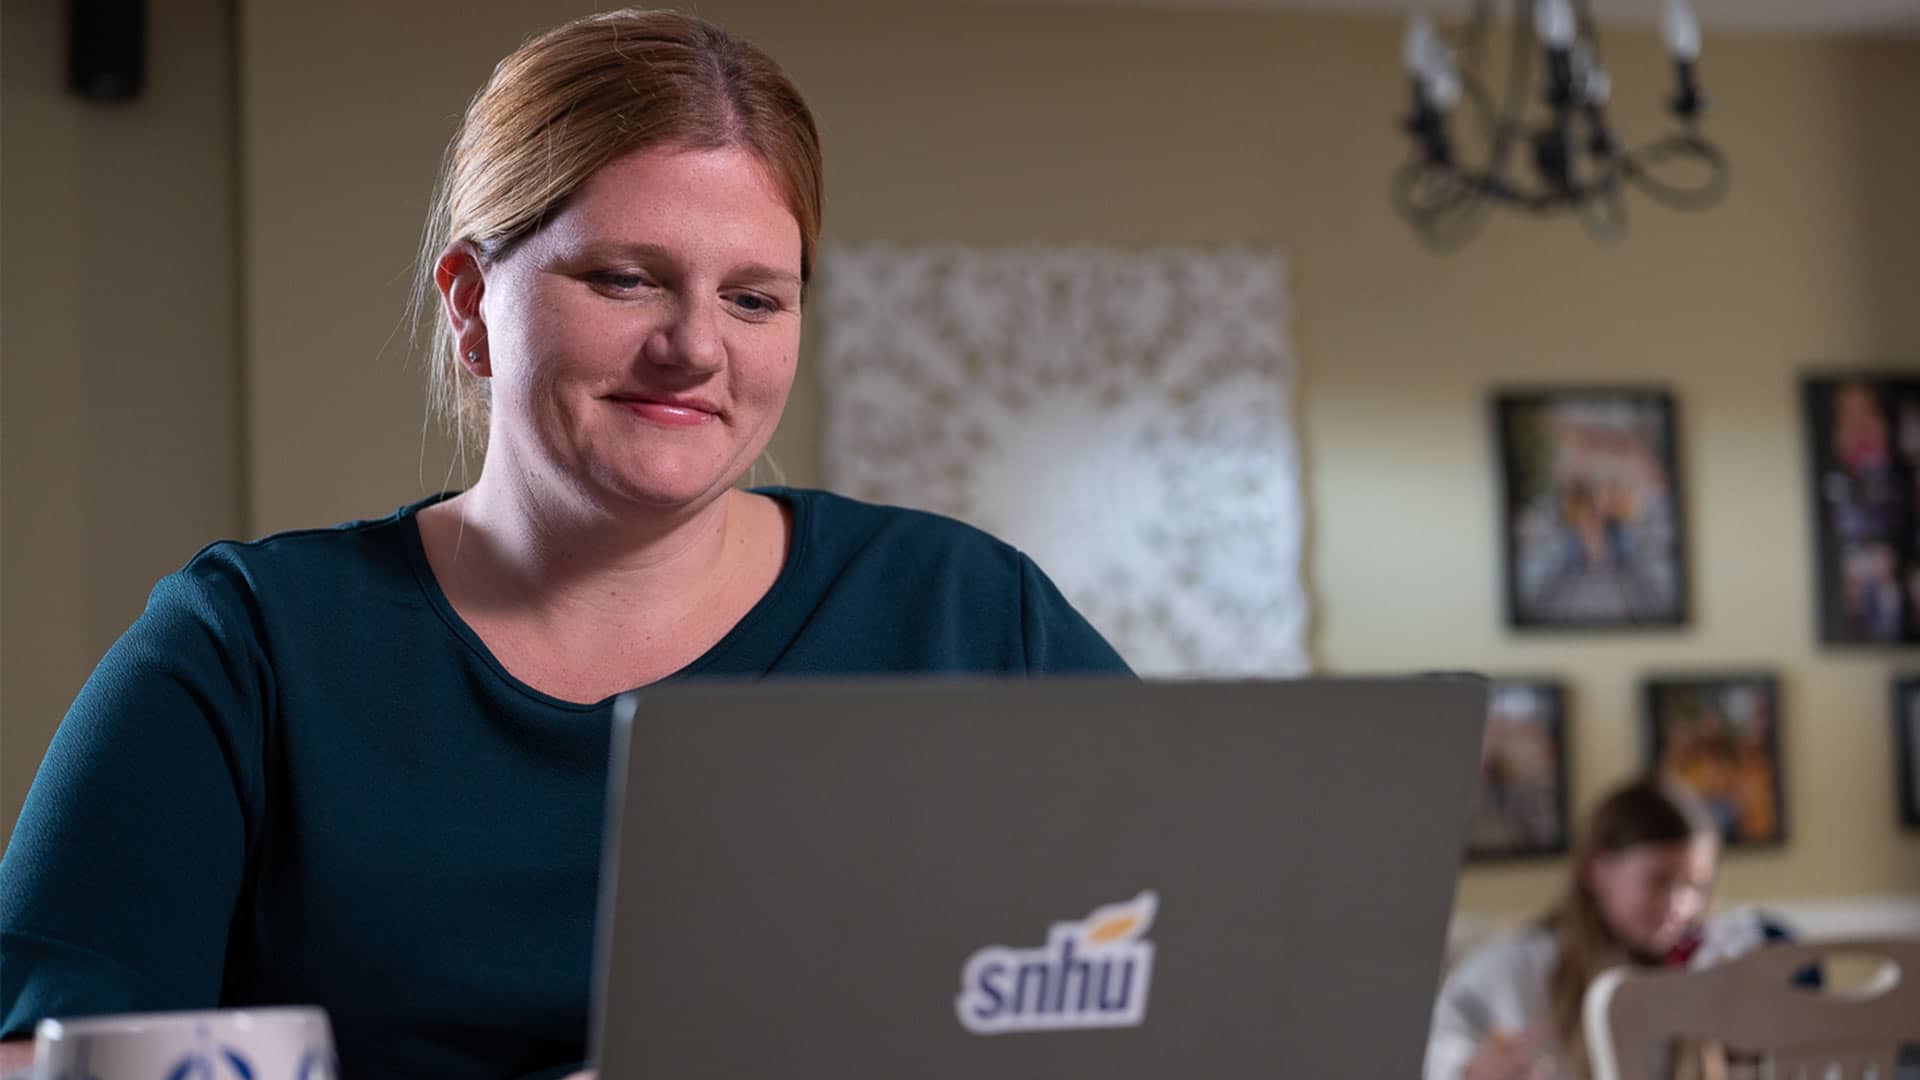 "Shelly Villa, who earned her degree from SNHU in 2019, working on her laptop with an SNHU sticker on the front and  a girl seated in the background."